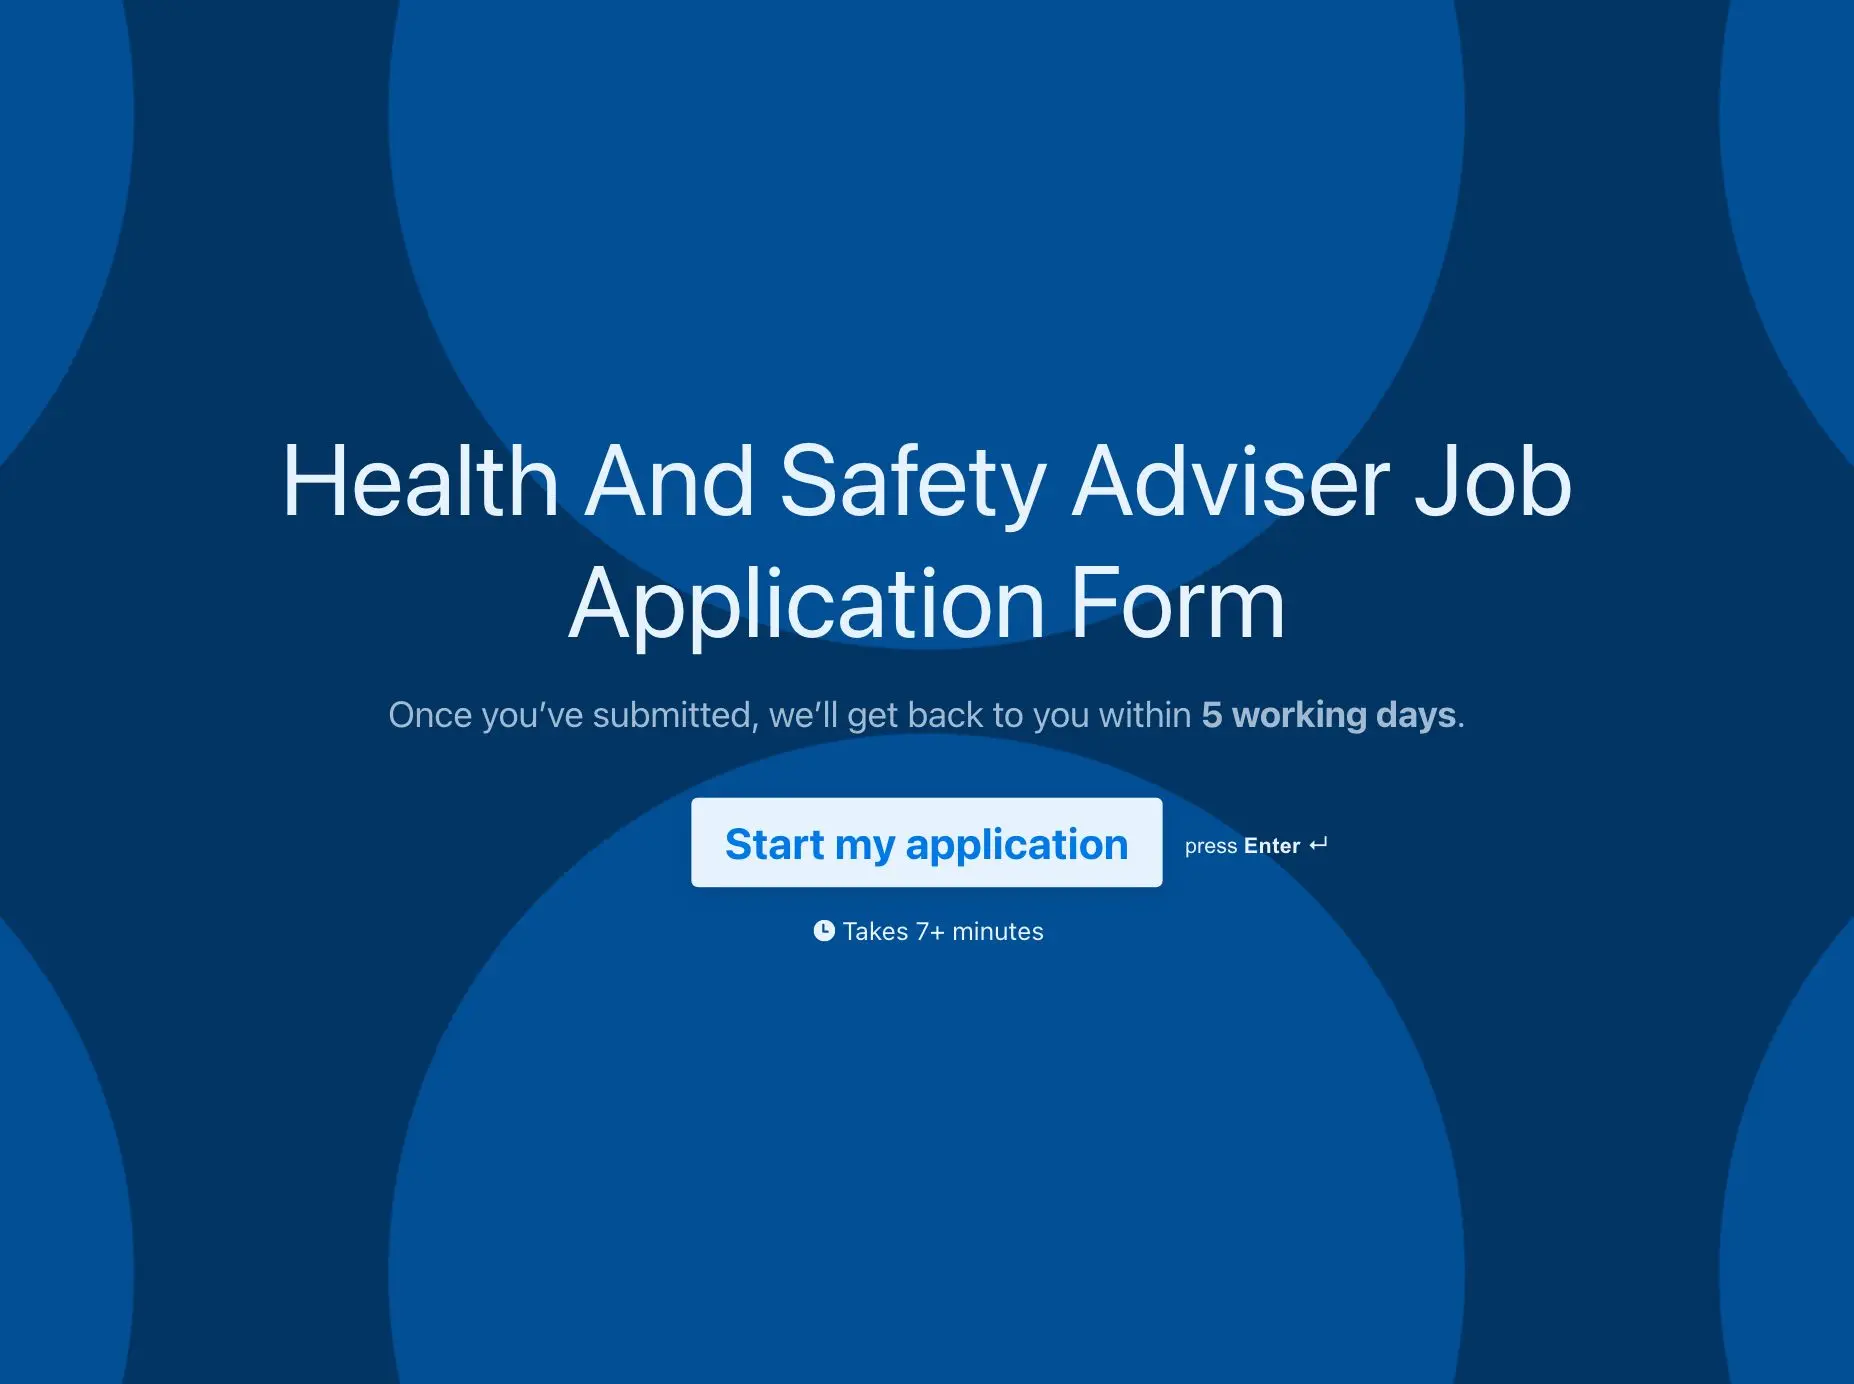 Health And Safety Adviser Job Application Form Template Hero